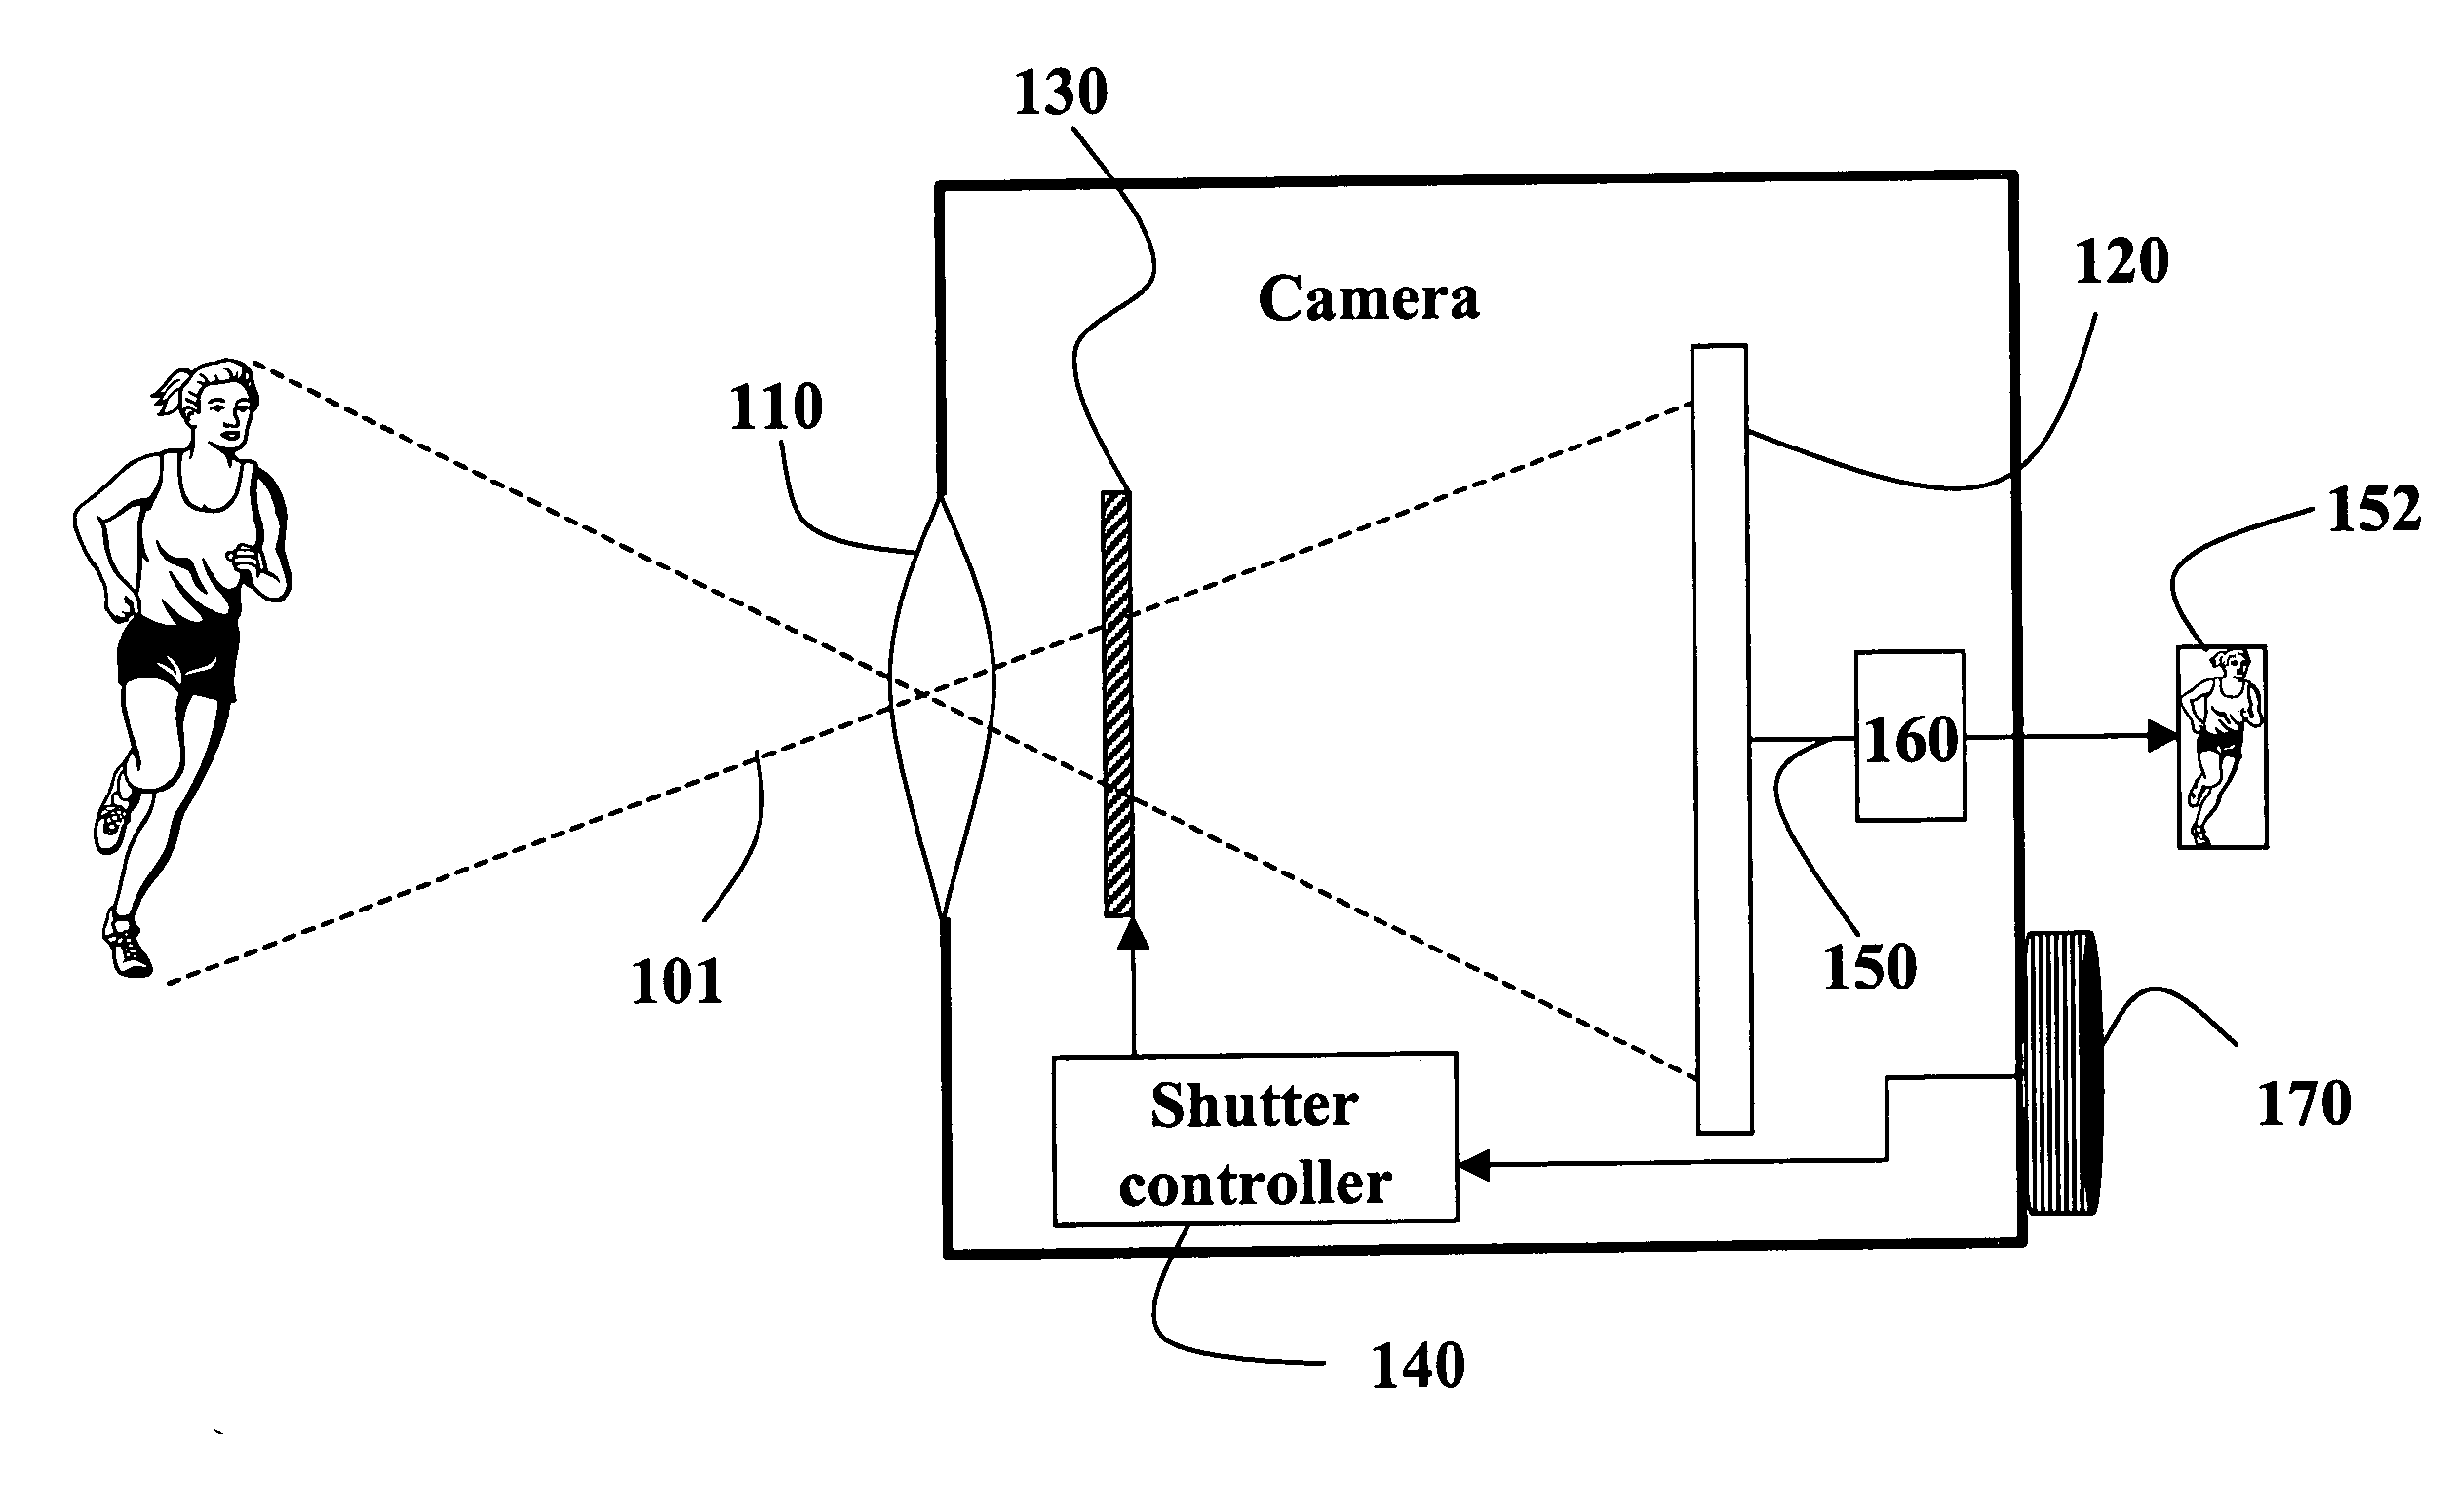 Method and apparatus for deblurring images